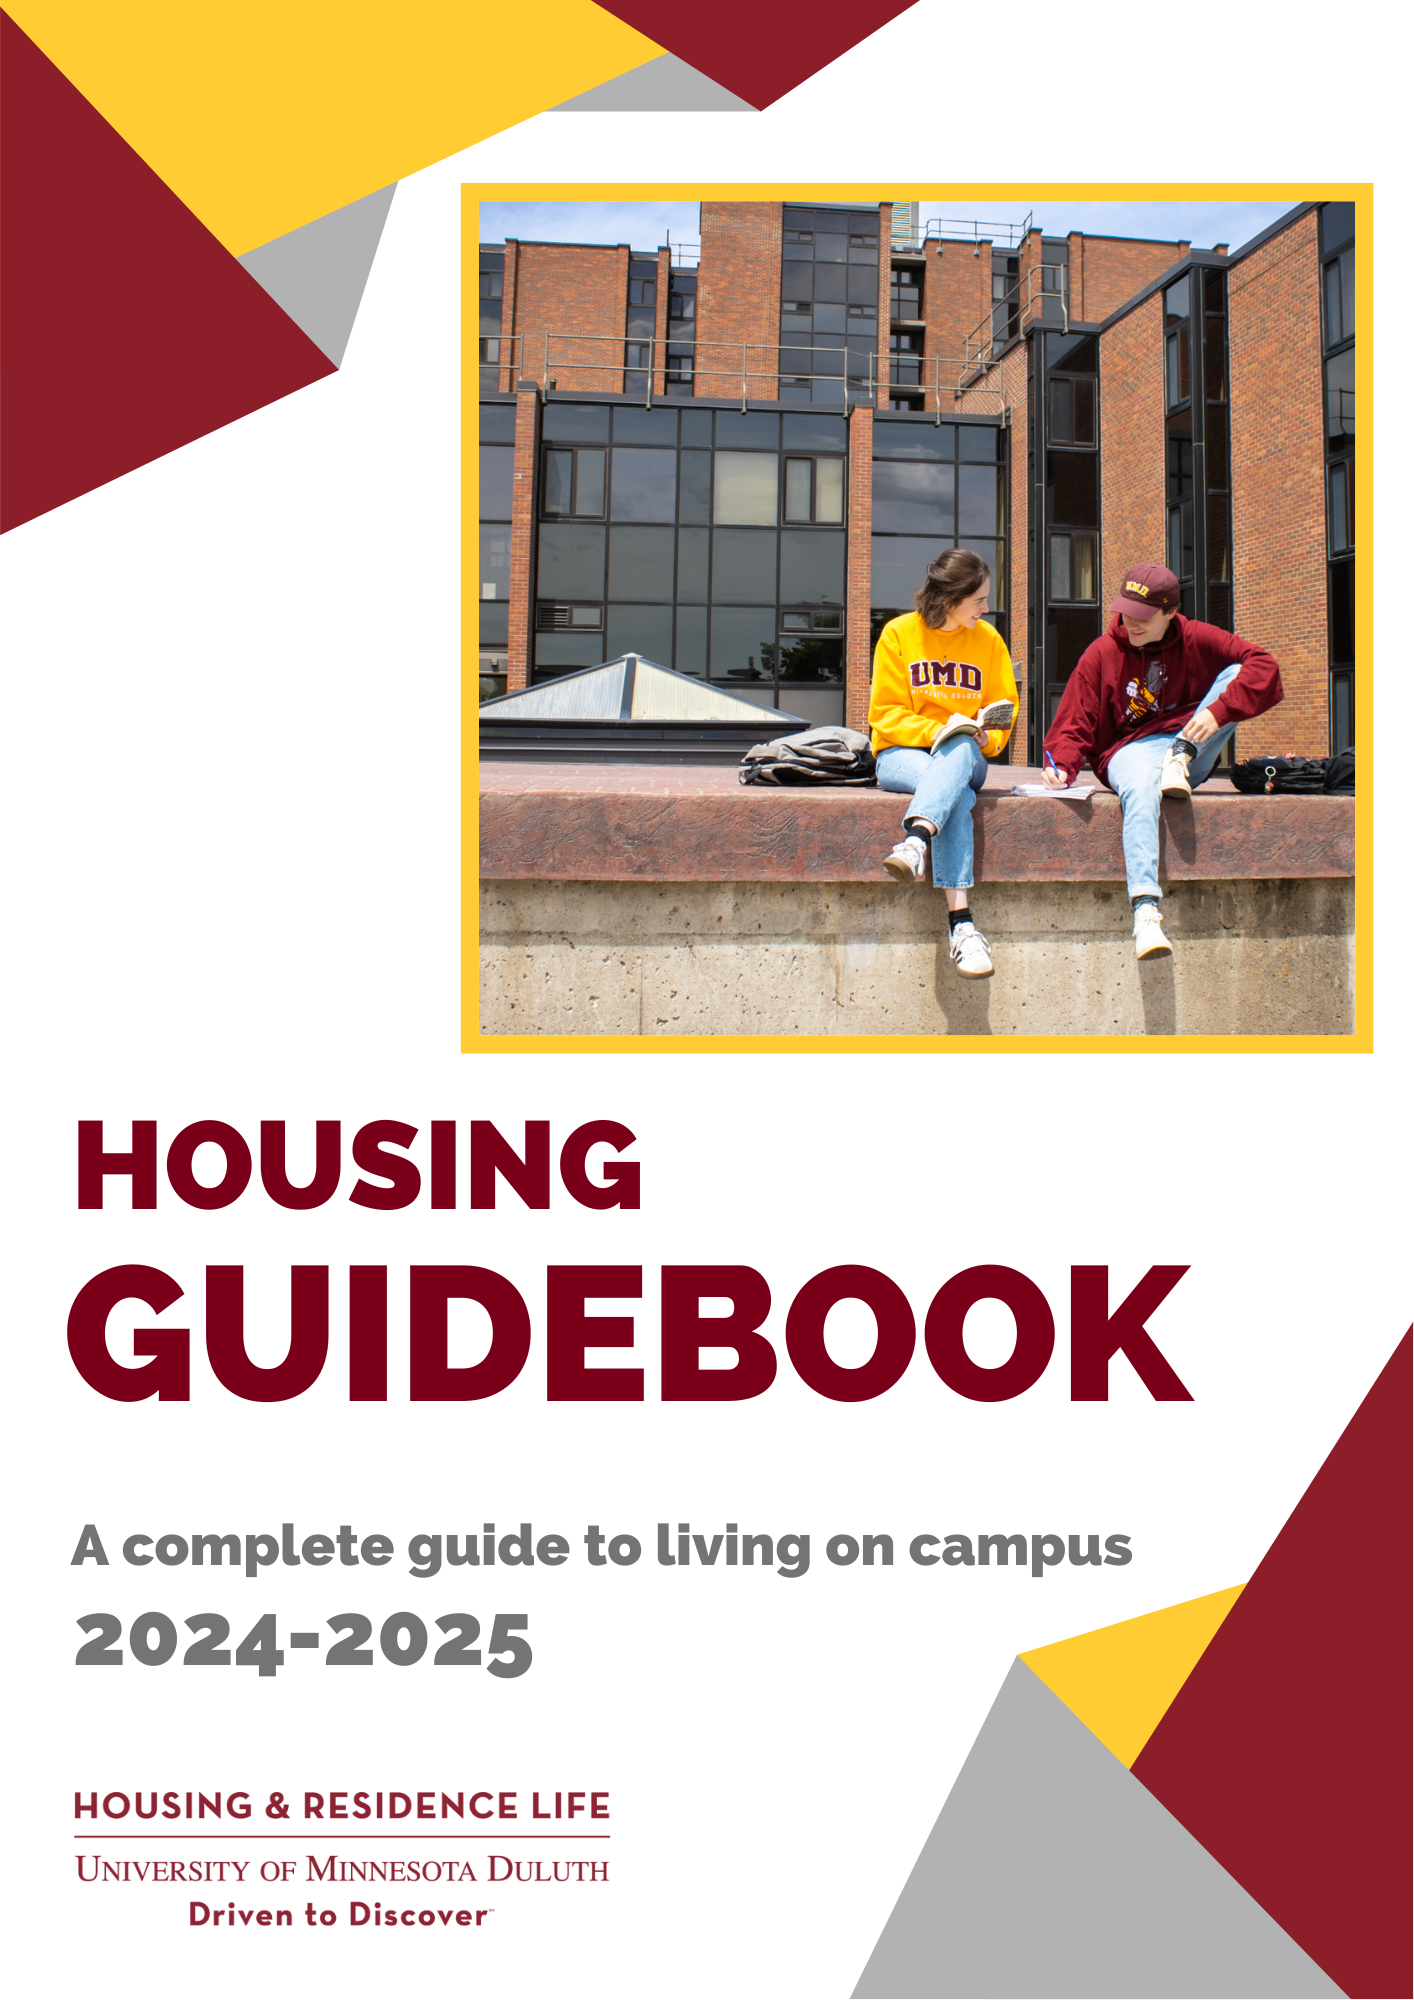 The image says "Housing Guidebook. A complete guide to living on campus. 2024-2025. The picture is of two students sitting on a ledge.